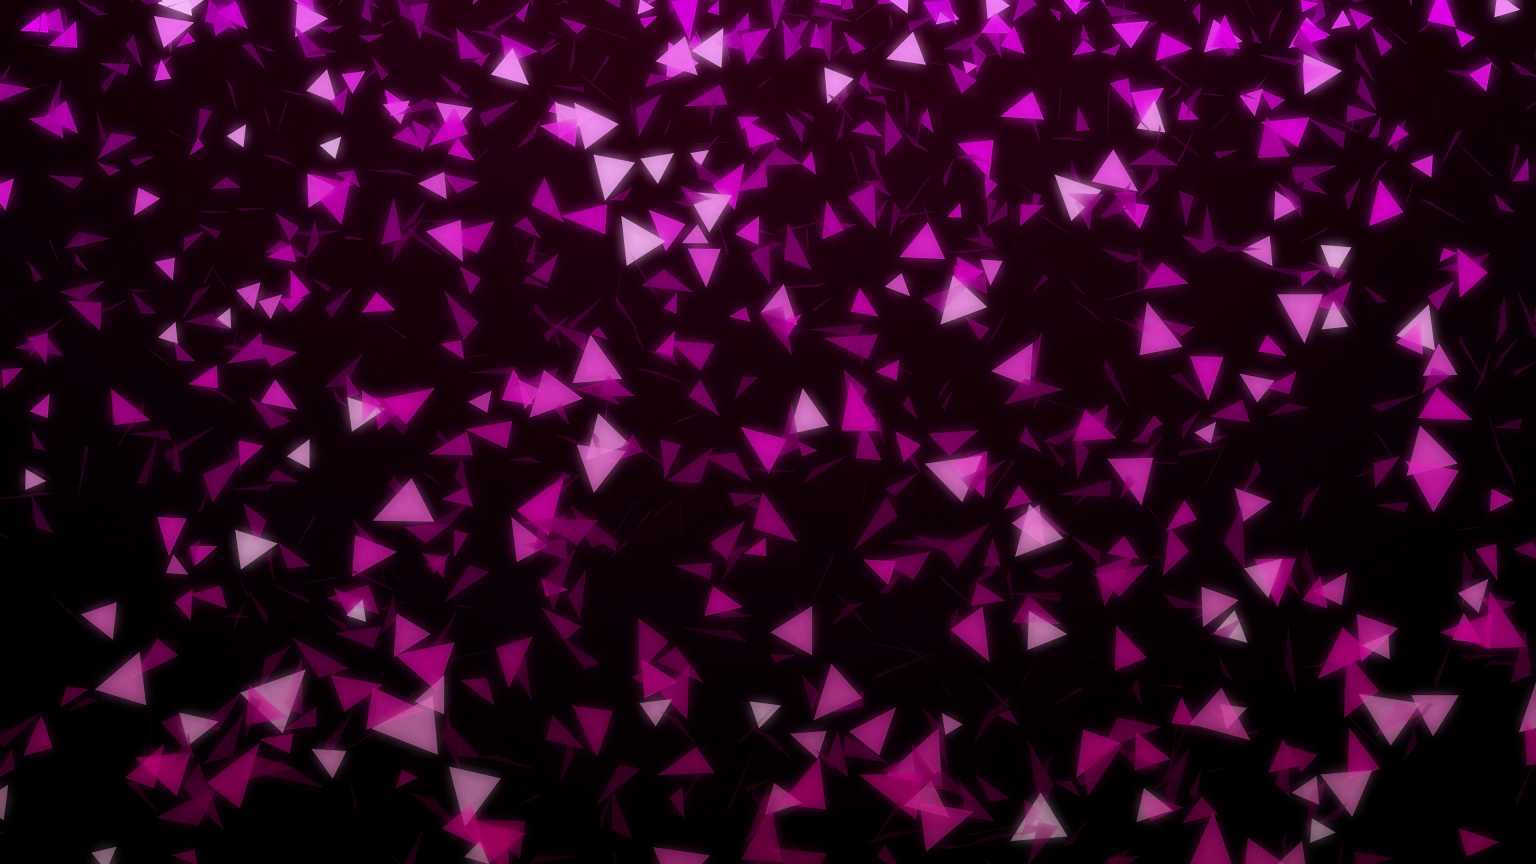 4K Pink Triangle Particles Falling Motion Background || VFX Free To Use 4K Screensaver